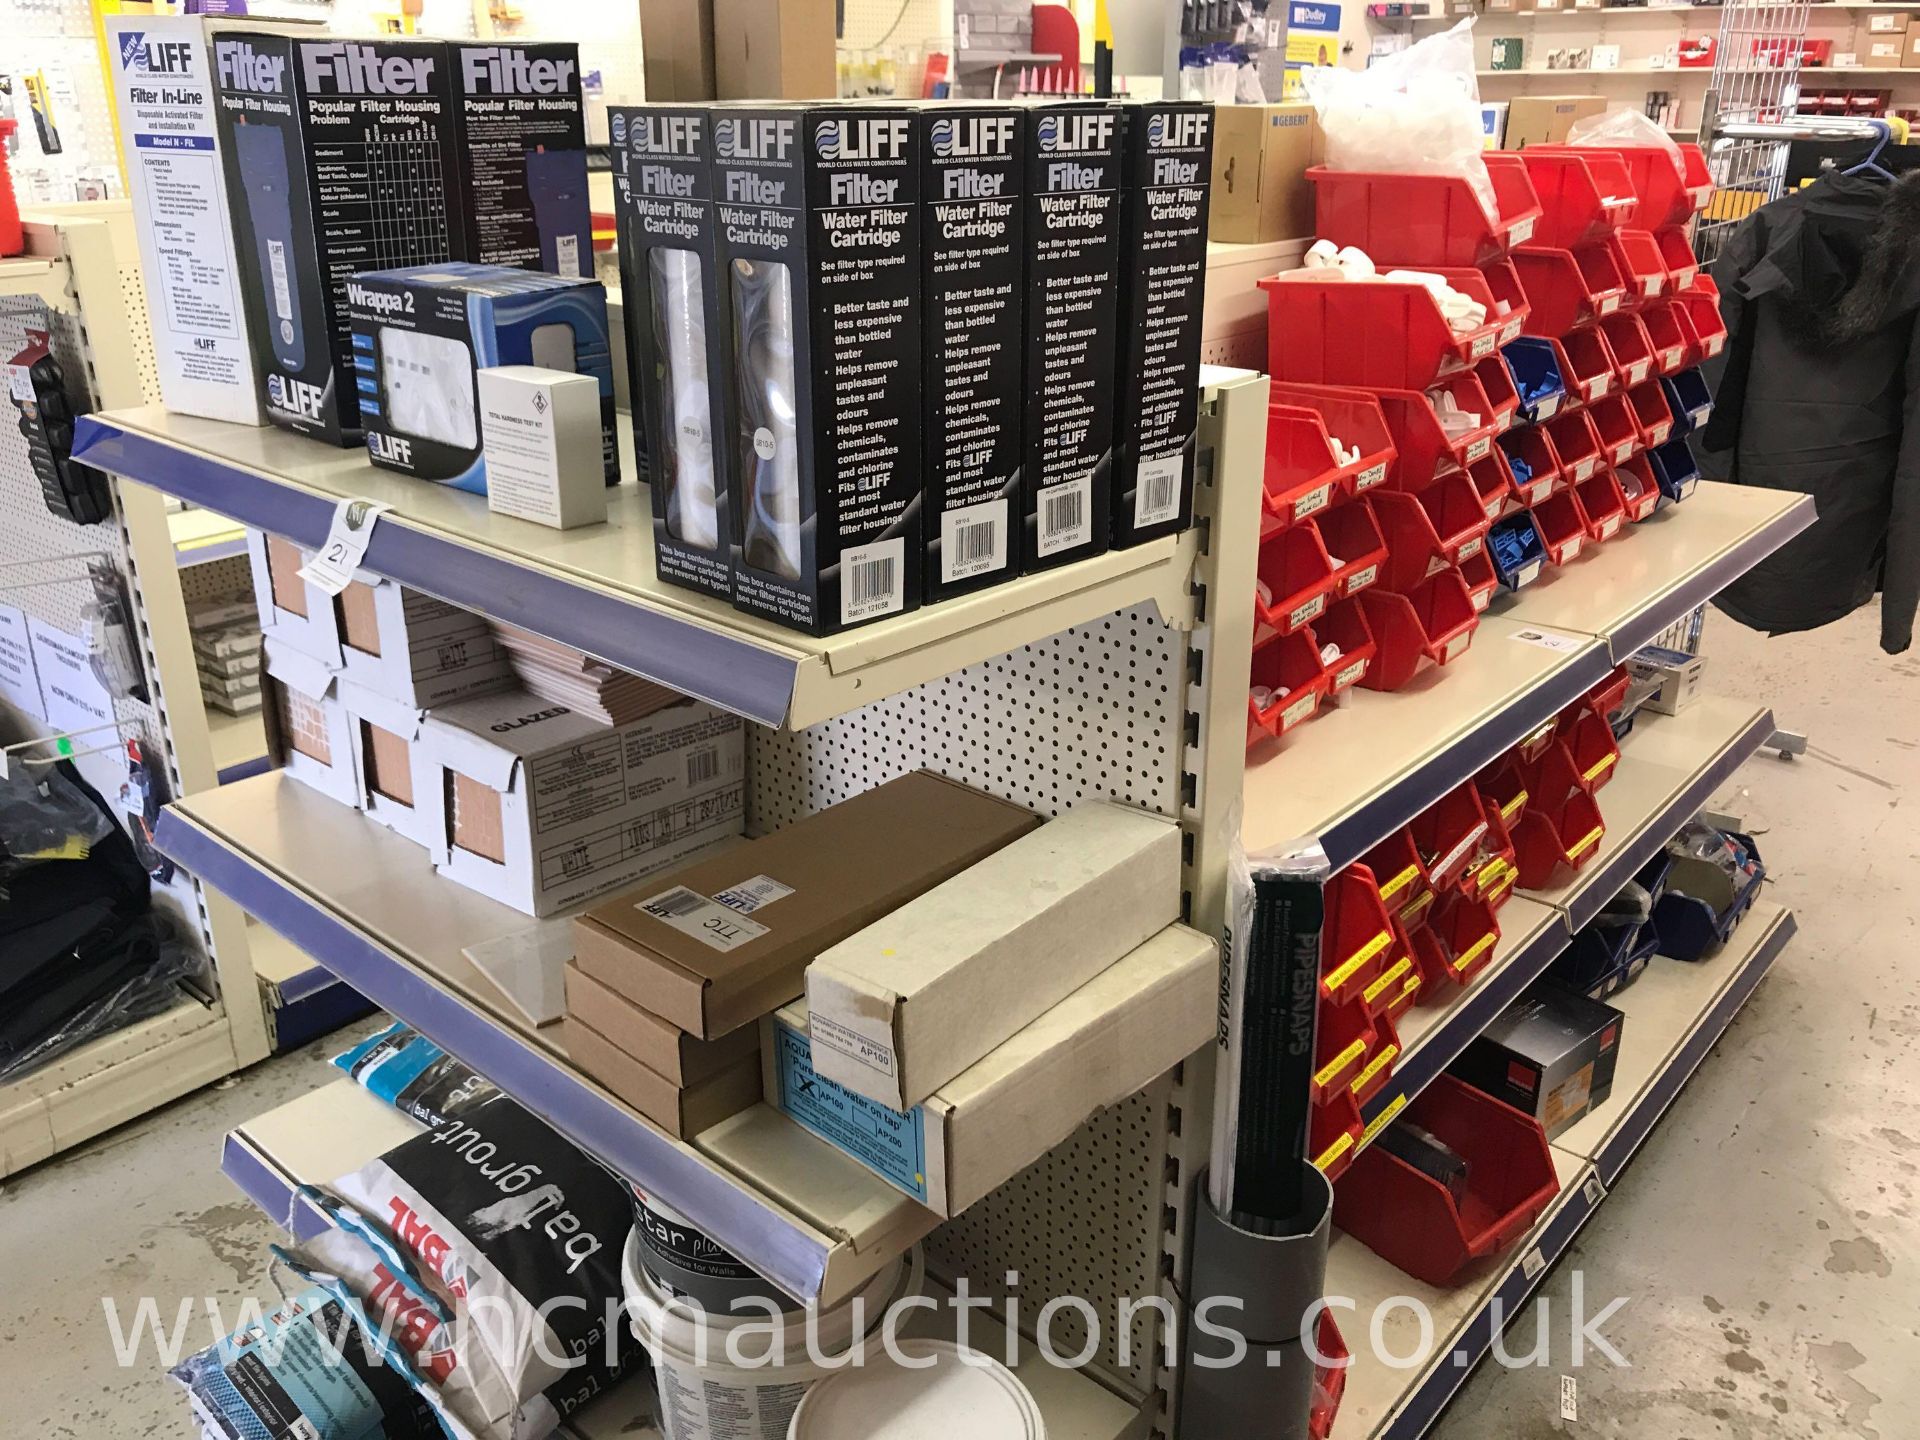 Double sided display rack with plumbing products - Image 3 of 12